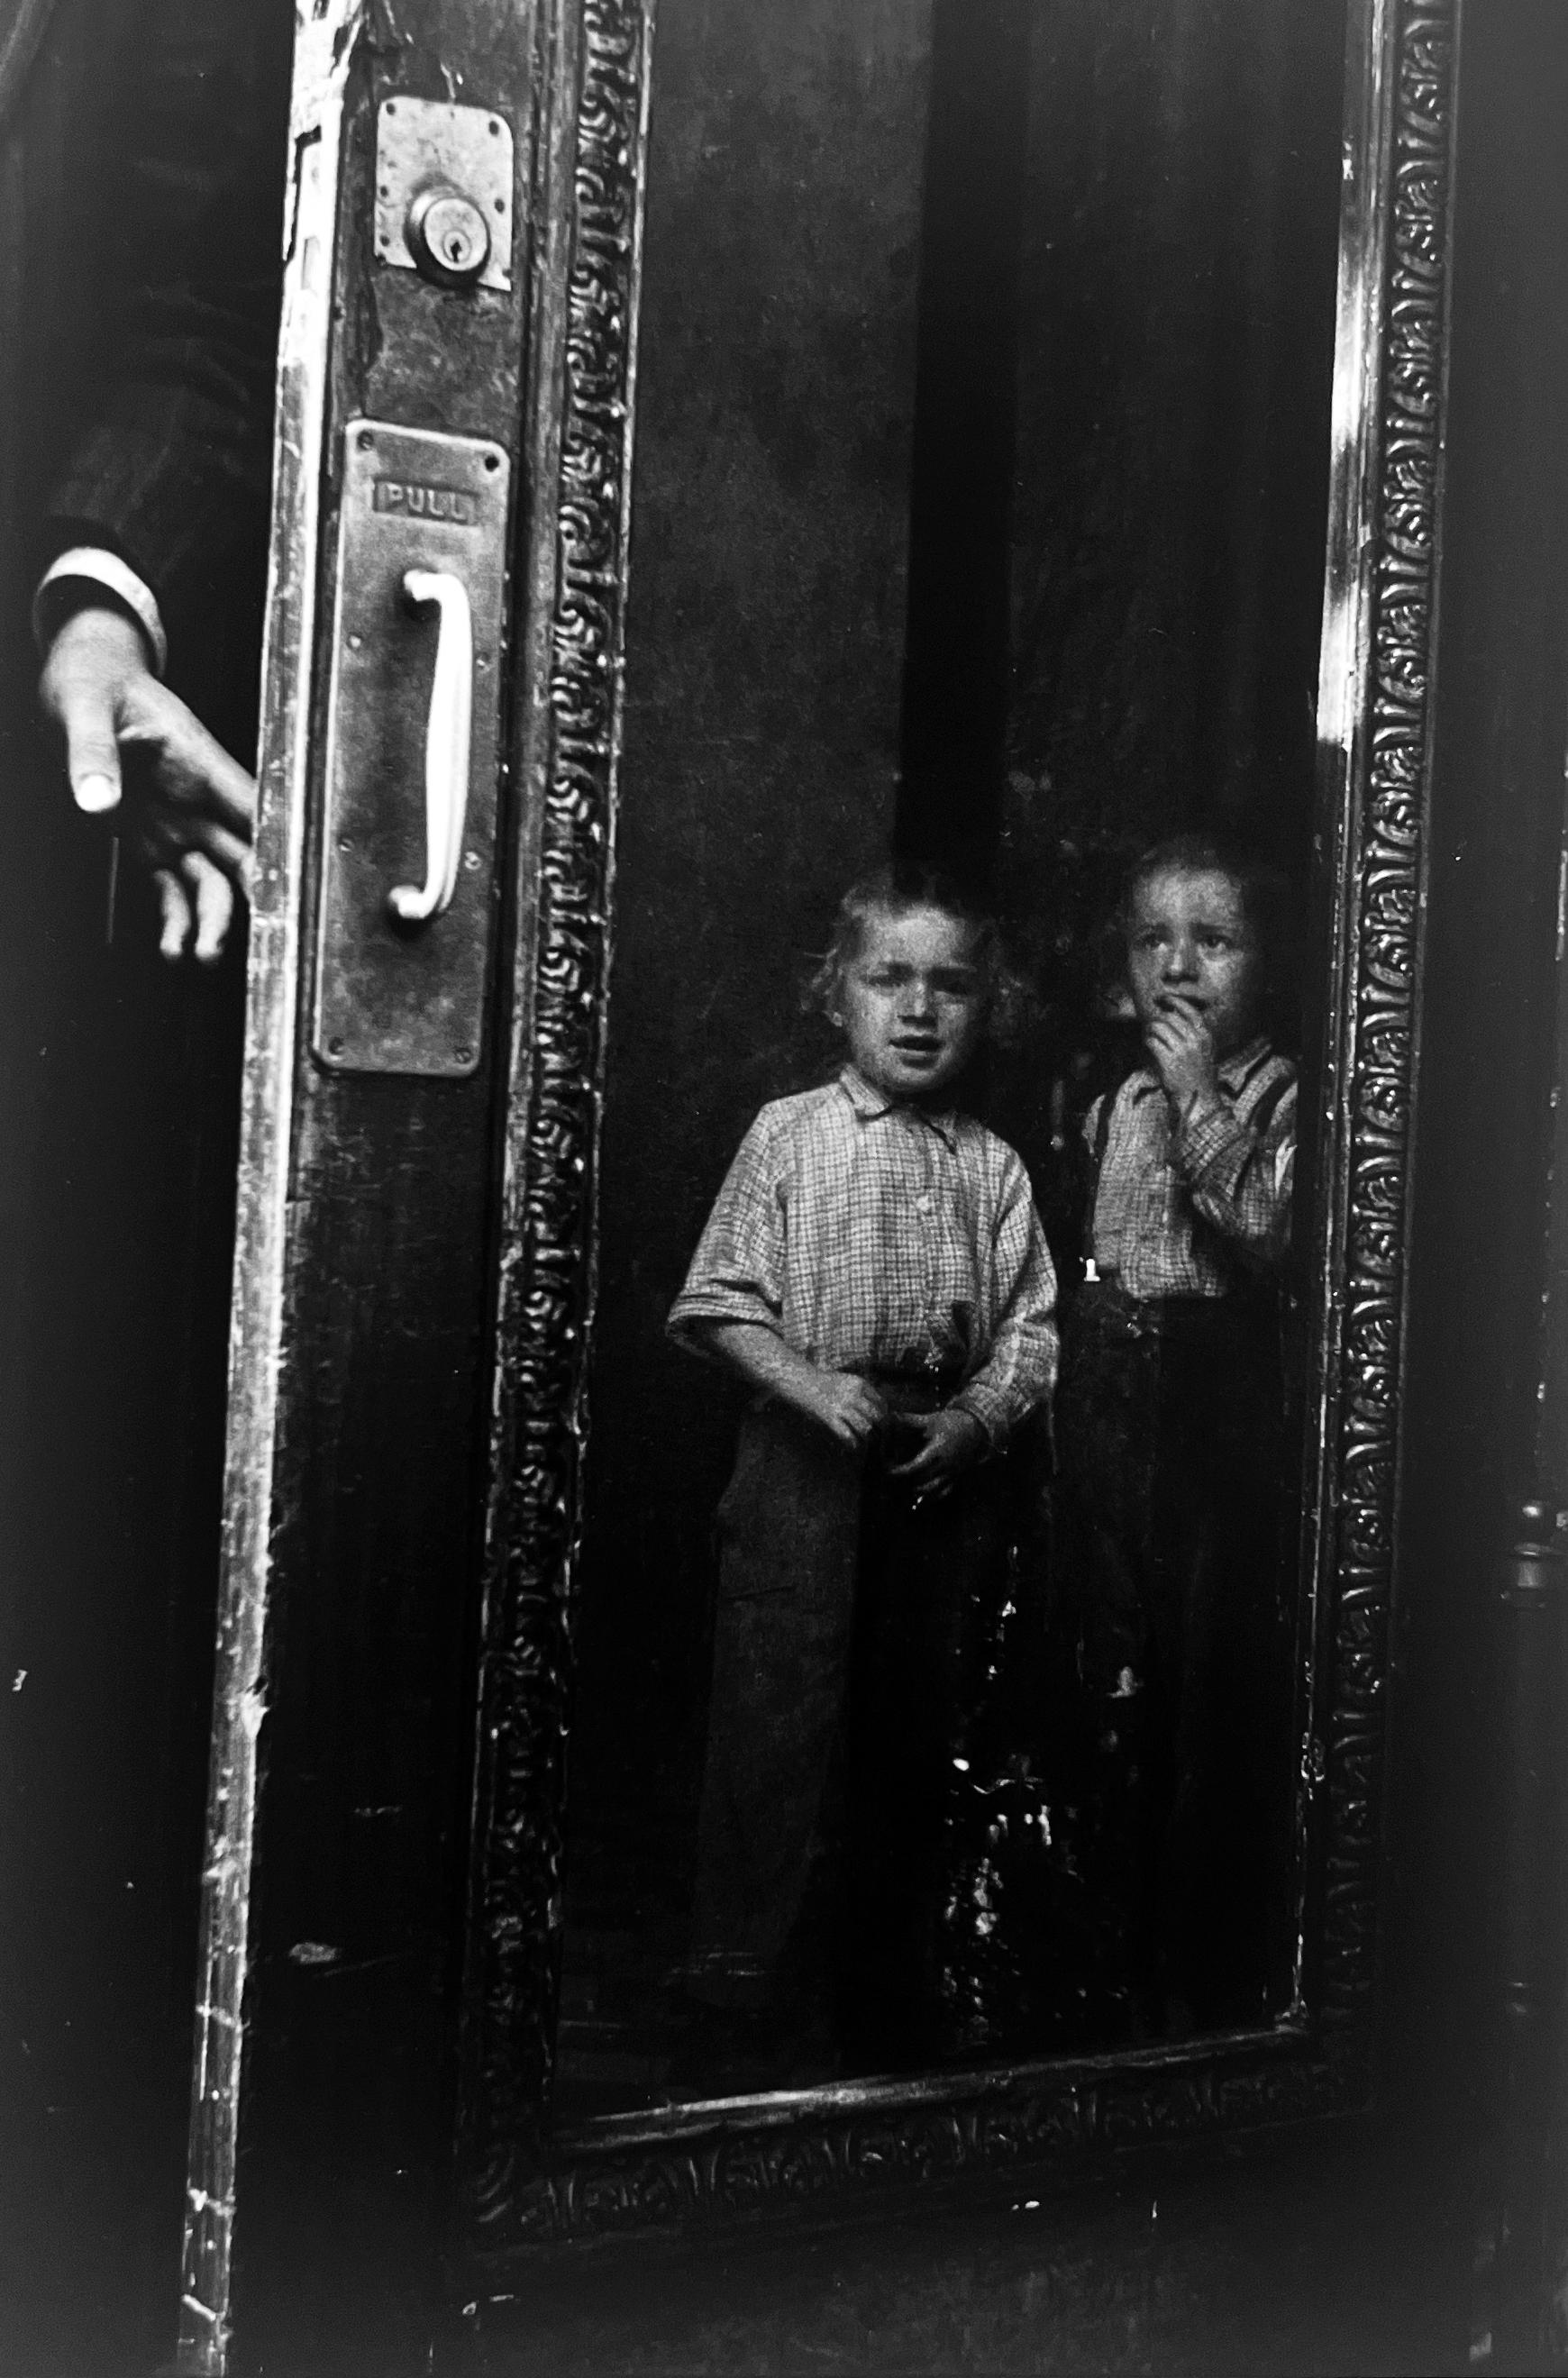 Yeshiva Boys, 1954 is a black-and-white photograph of two young studious boys behind a glass door, an entrance to a Brooklyn brownstone in New York City. A gelatin silver lifetime print, 15.5” x 12